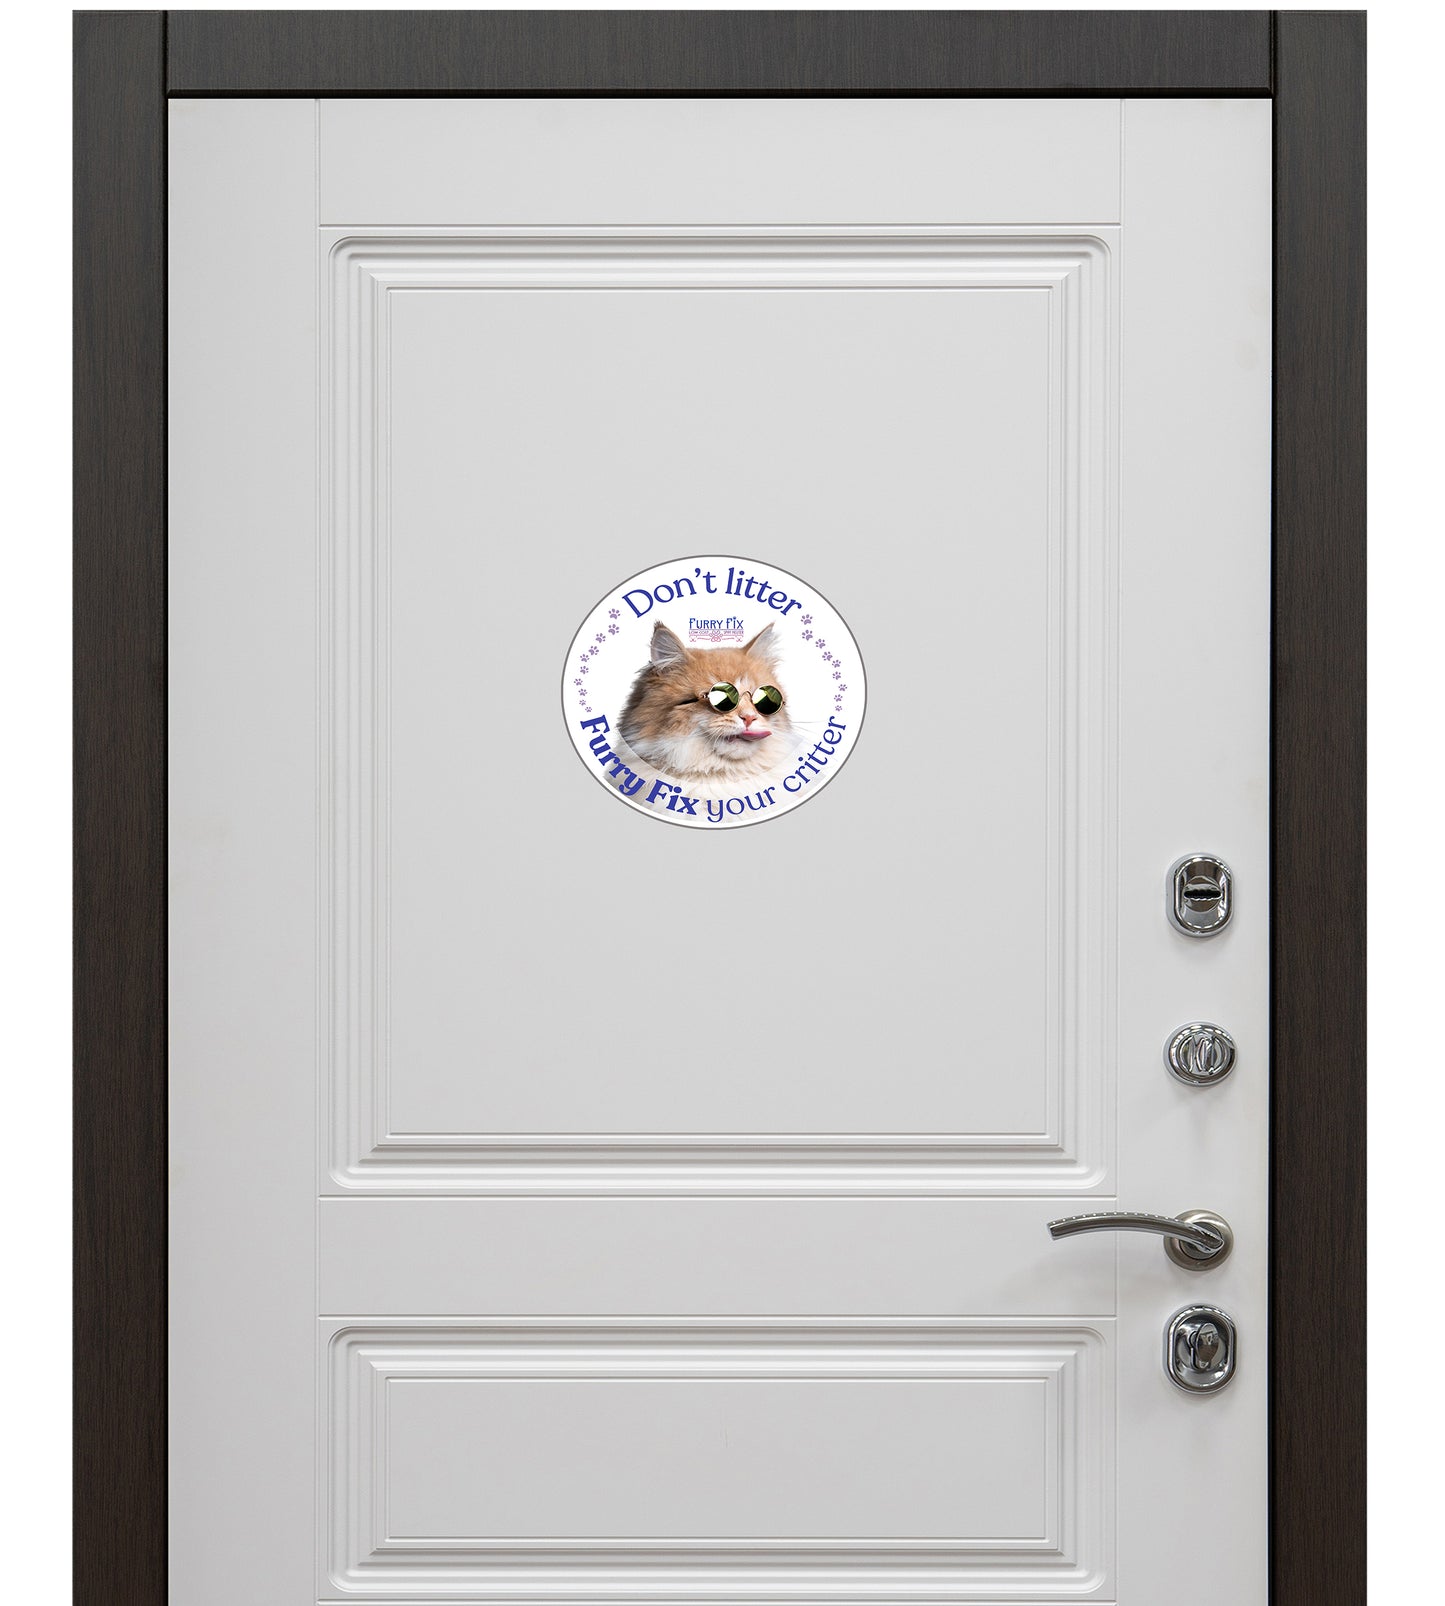 Furry Fix magnet - Don't litter - Furry Fix your critter - magnet for inside or outside!